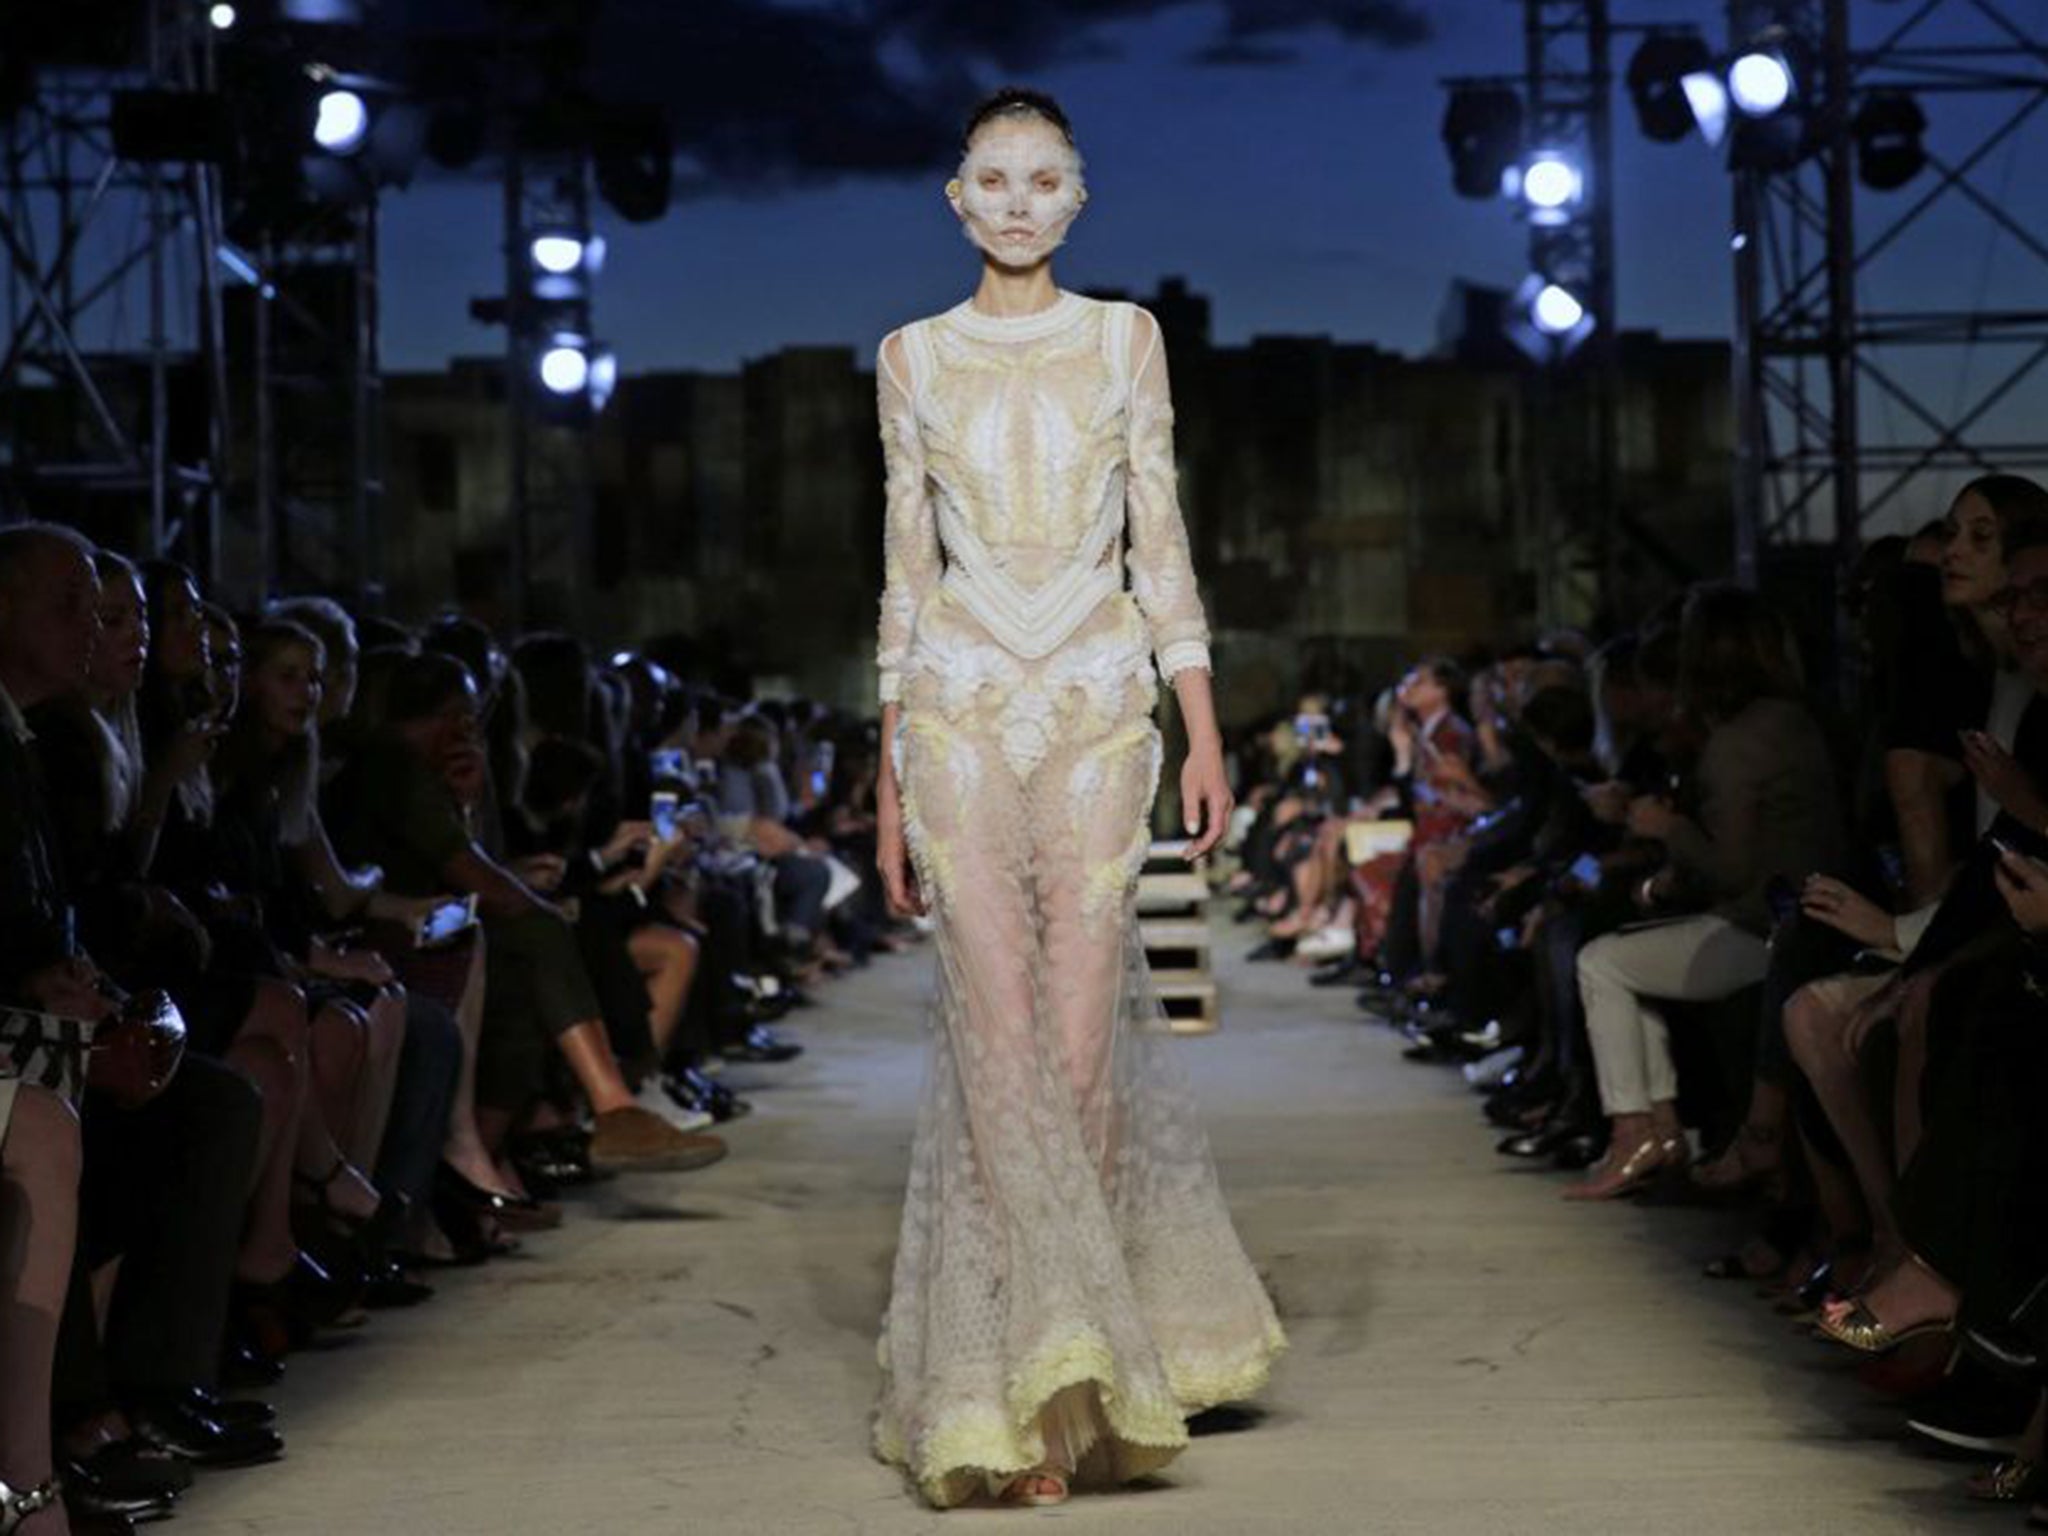 Tisci's was a good show – but not great, as the occasion perhaps demanded